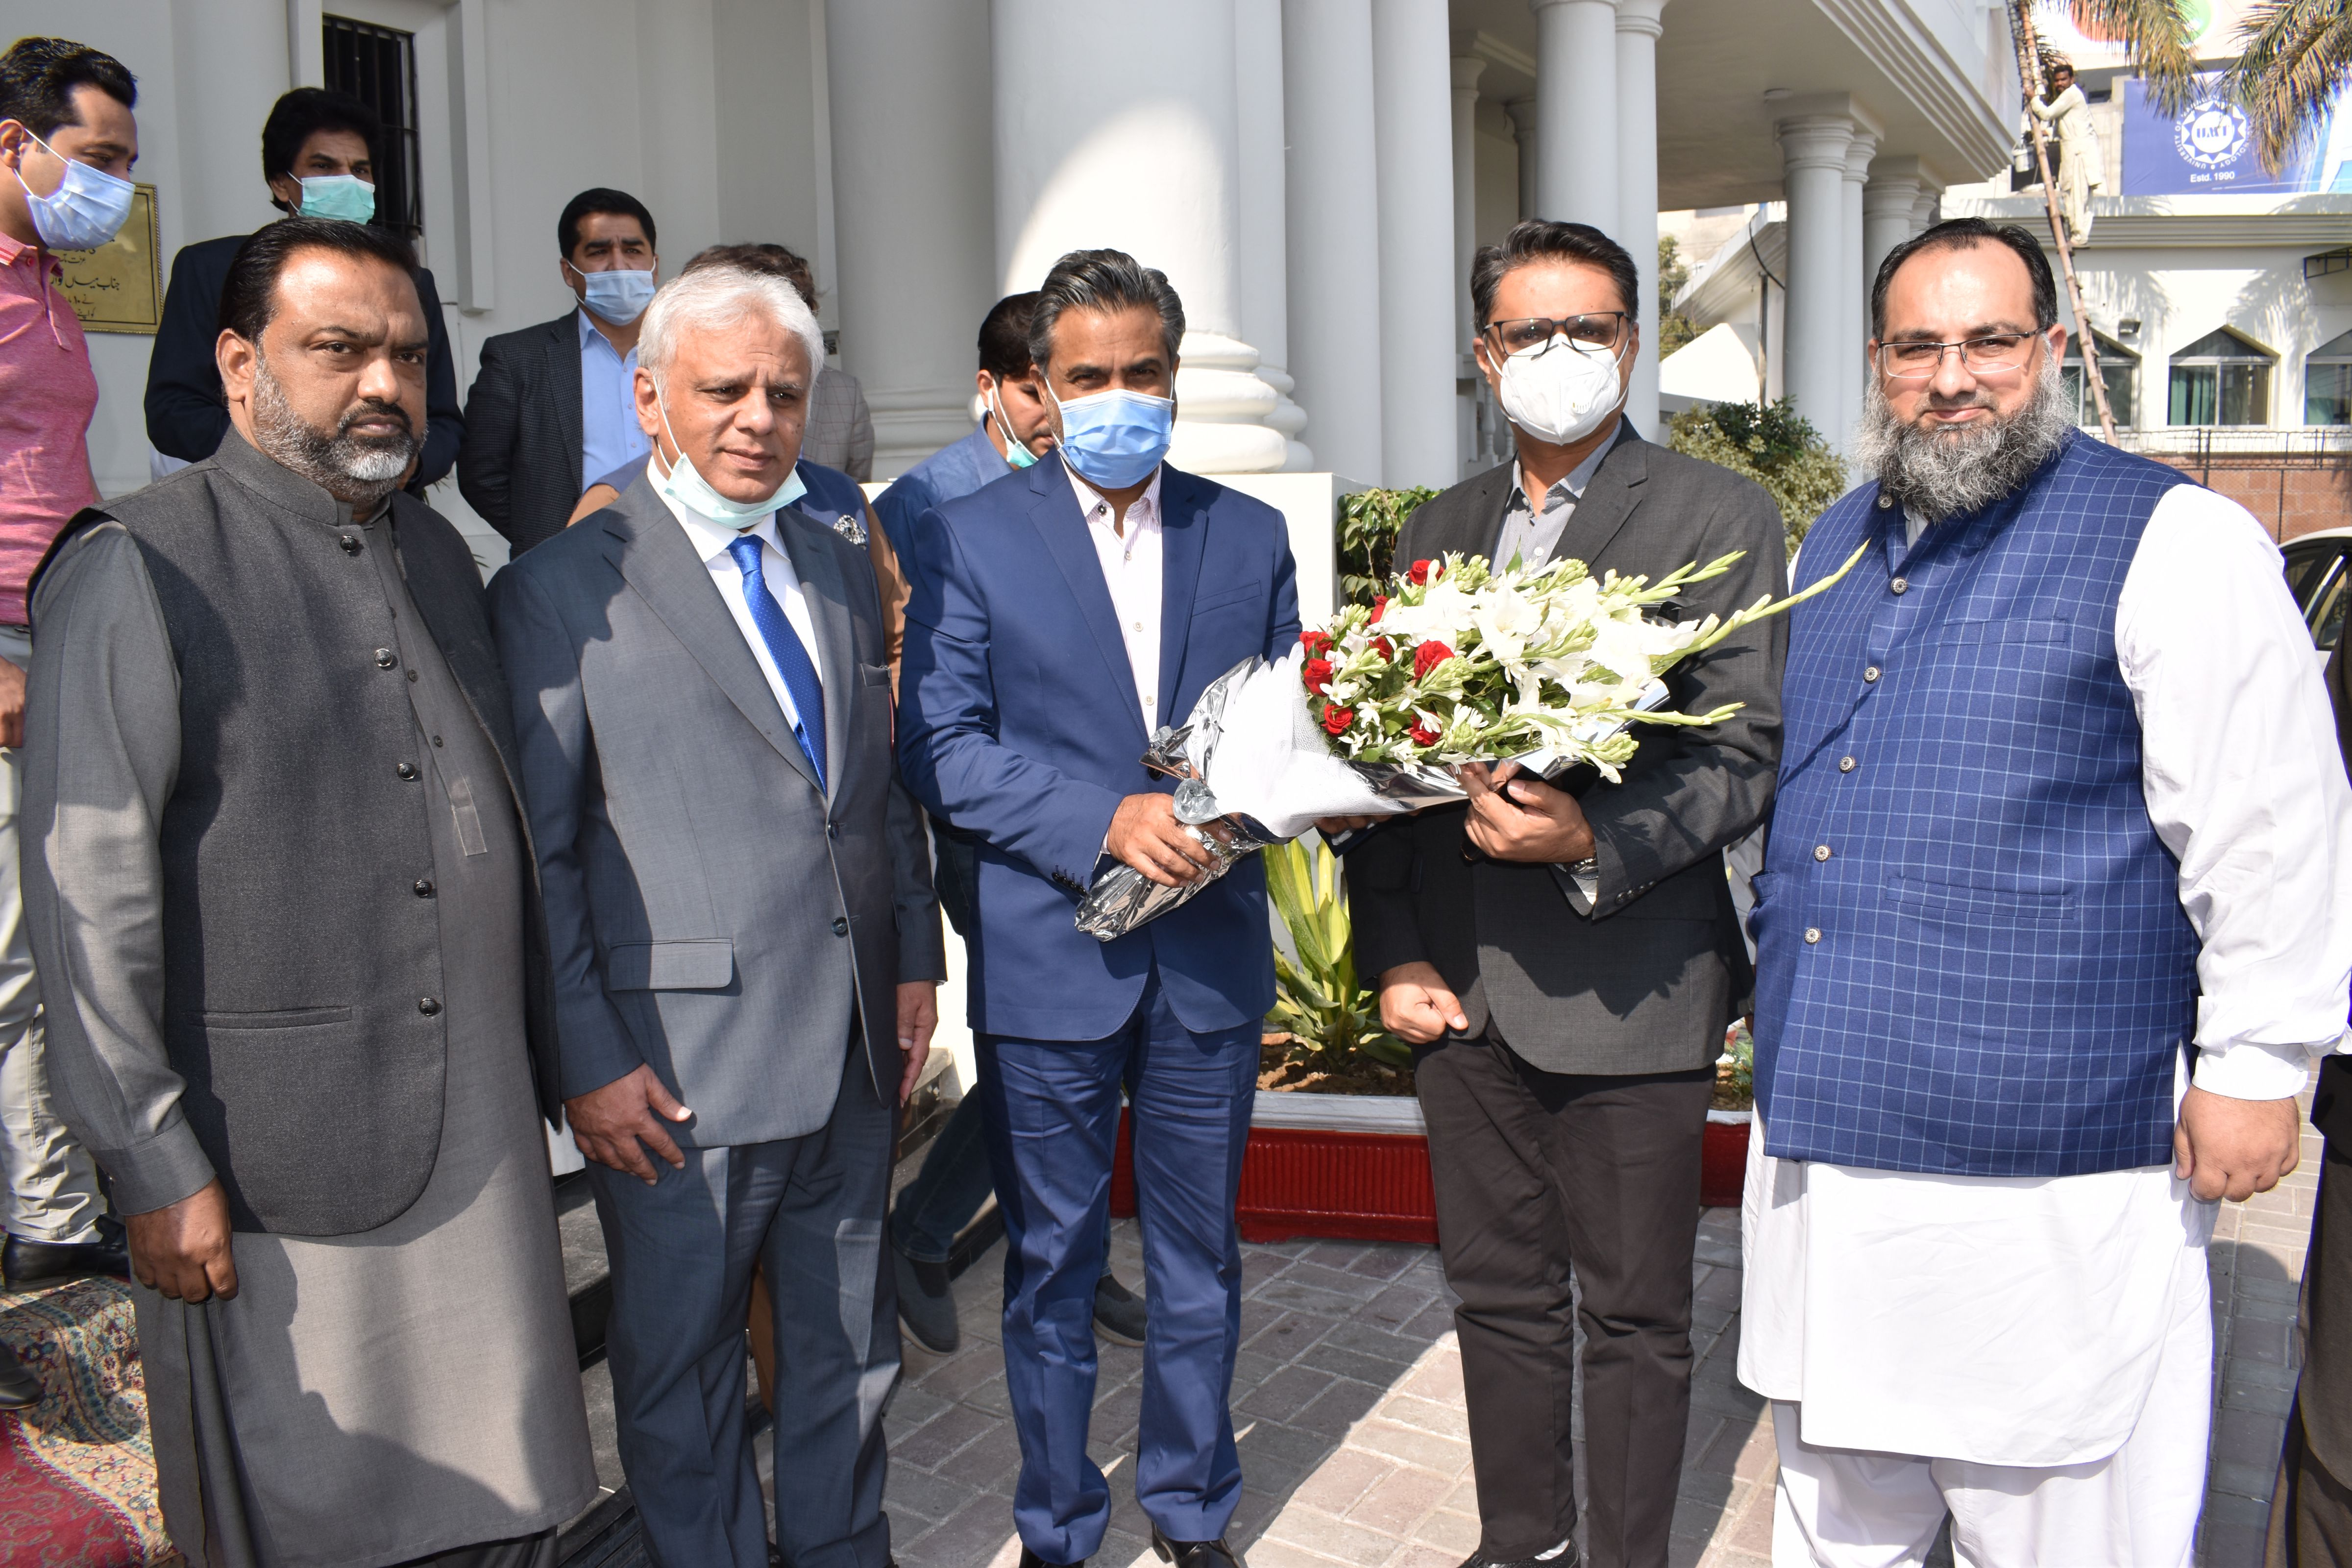 Visit of Mr. Ahsan Ali Mangi, Secretary, TDAP, to Sialkot Chamber of Commerce and Industry, for a meeting with members of Sialkot Chamber of Commerce and Industry on 4 November, 2020